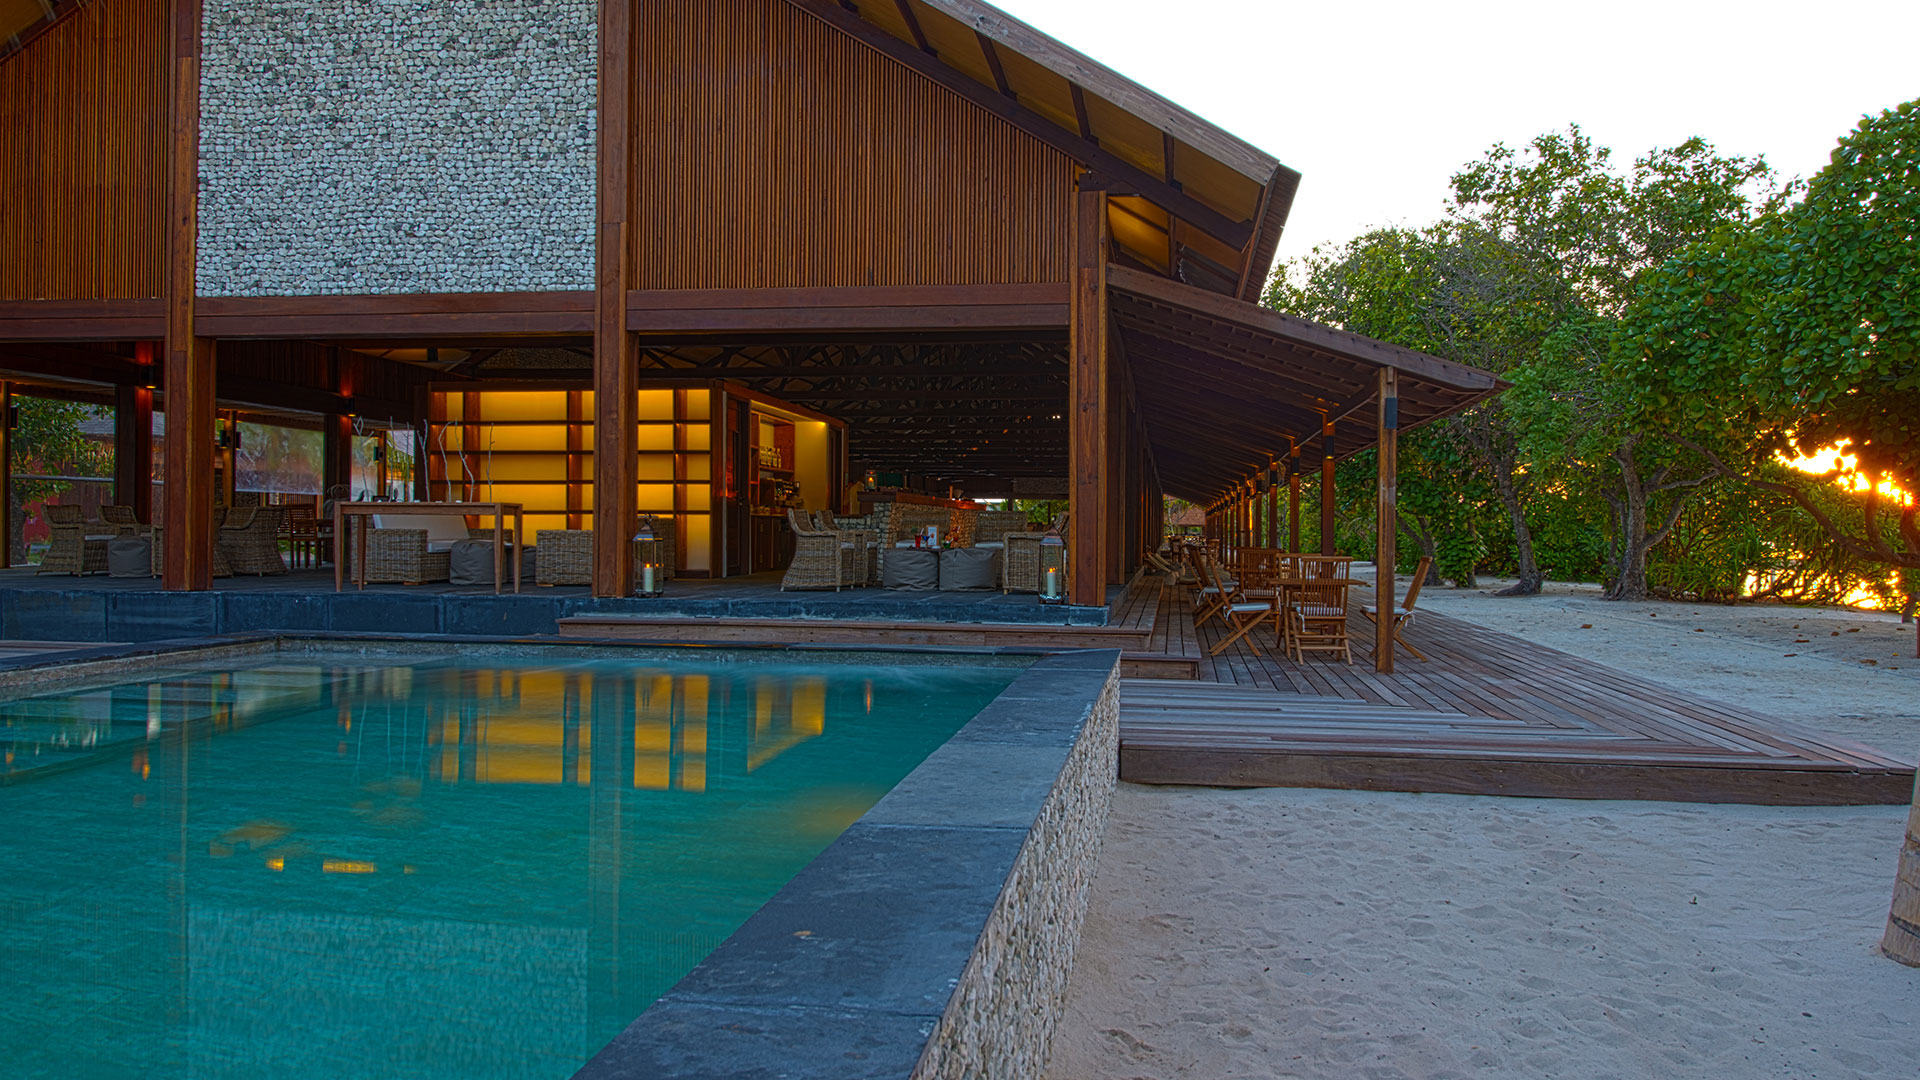  The Barefoot Eco Hotel